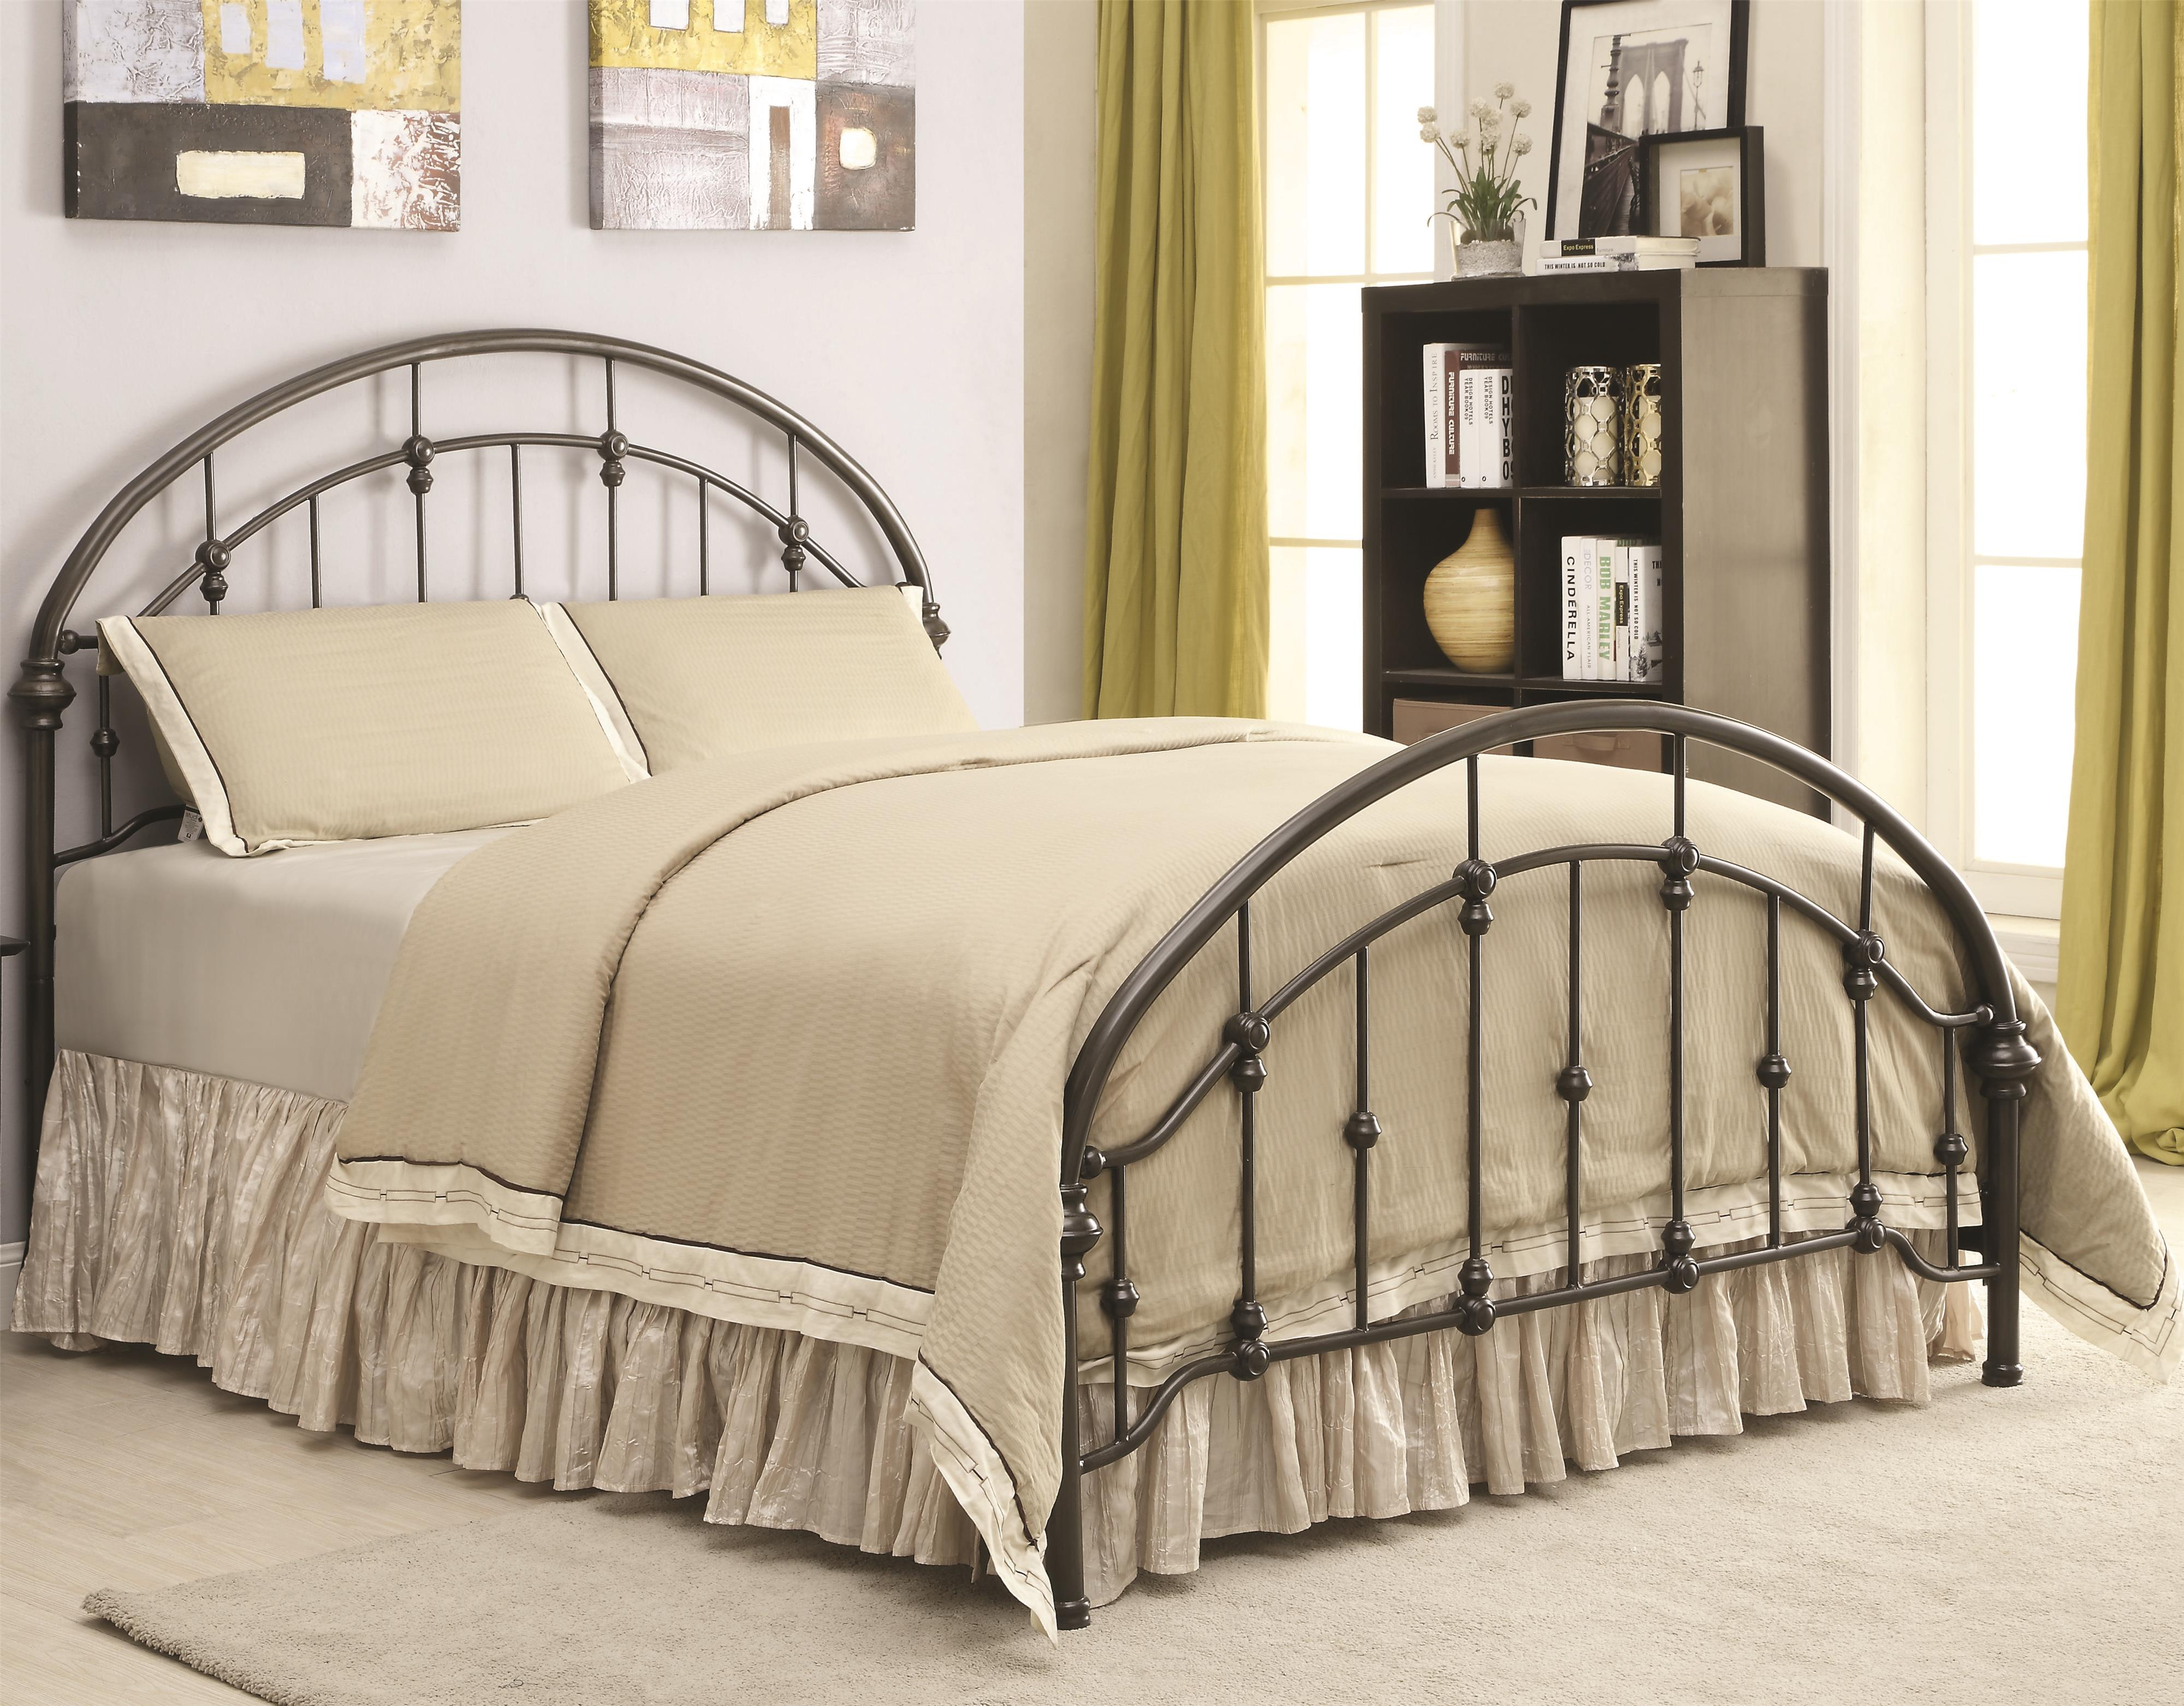 Iron Beds And Headboards Metal Curved Queen Bed Coaster At Value City Furniture in measurements 4000 X 3125